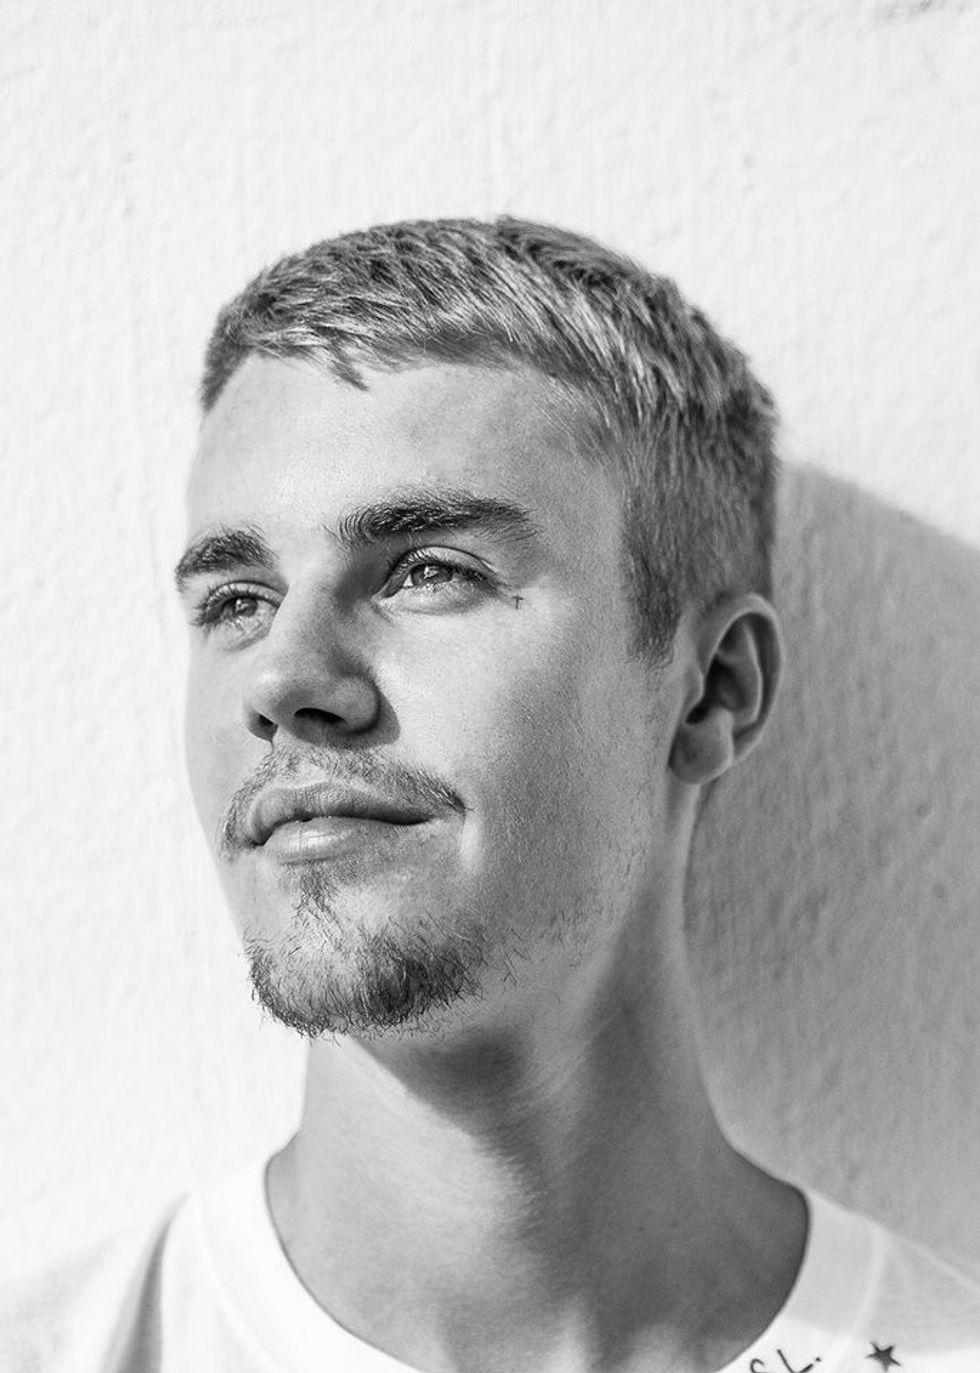 Justin Bieber Is Just Taking A Break From Music